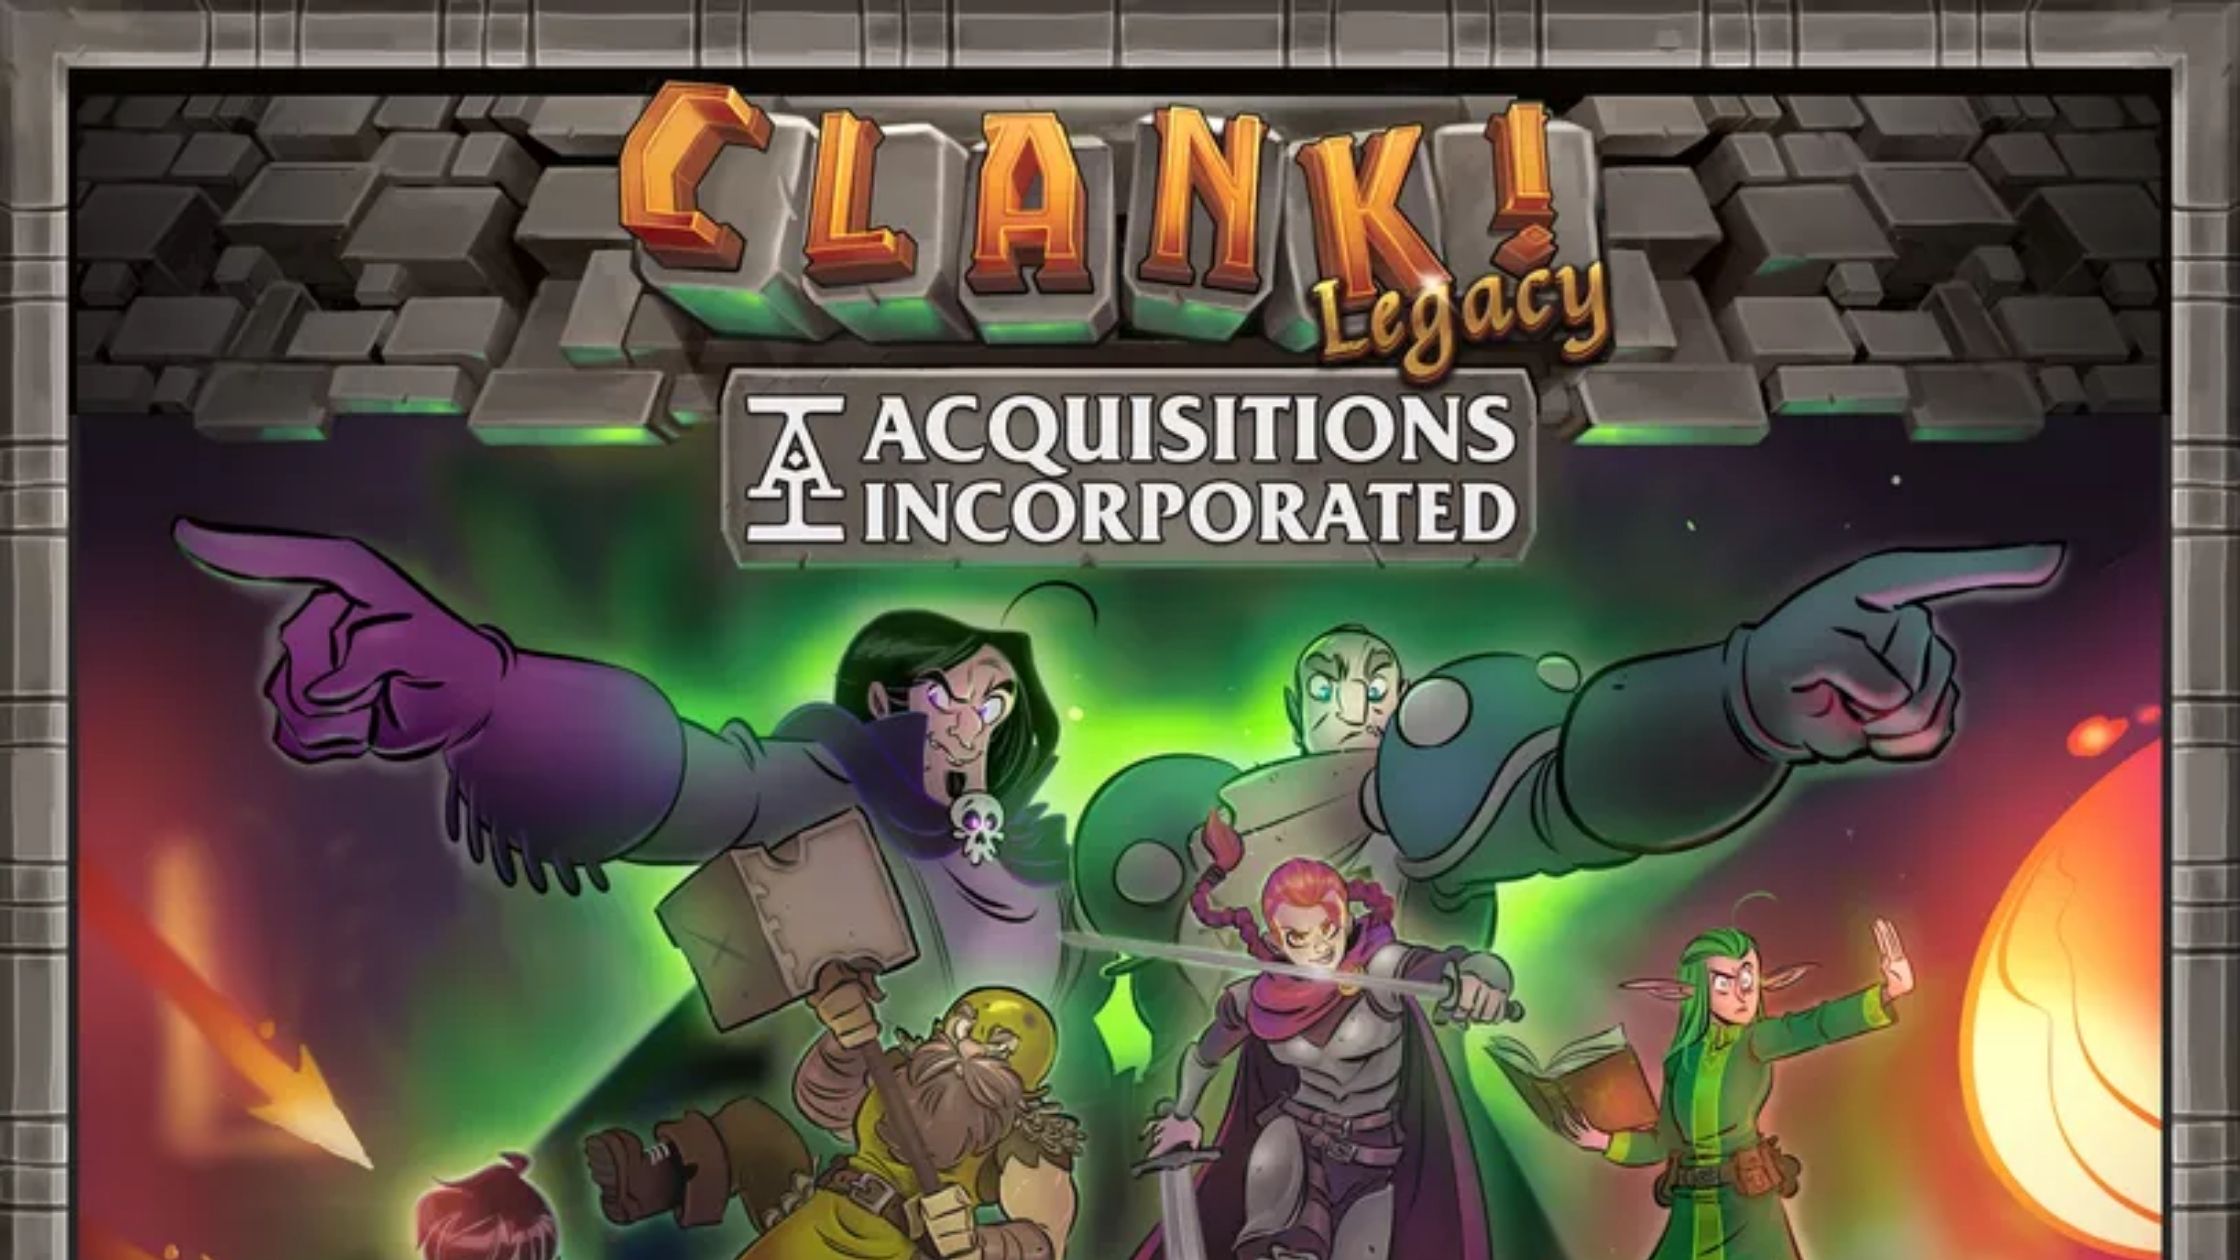 Clank! Legacy: Acquisitions Incorporated is a popular legacy board game